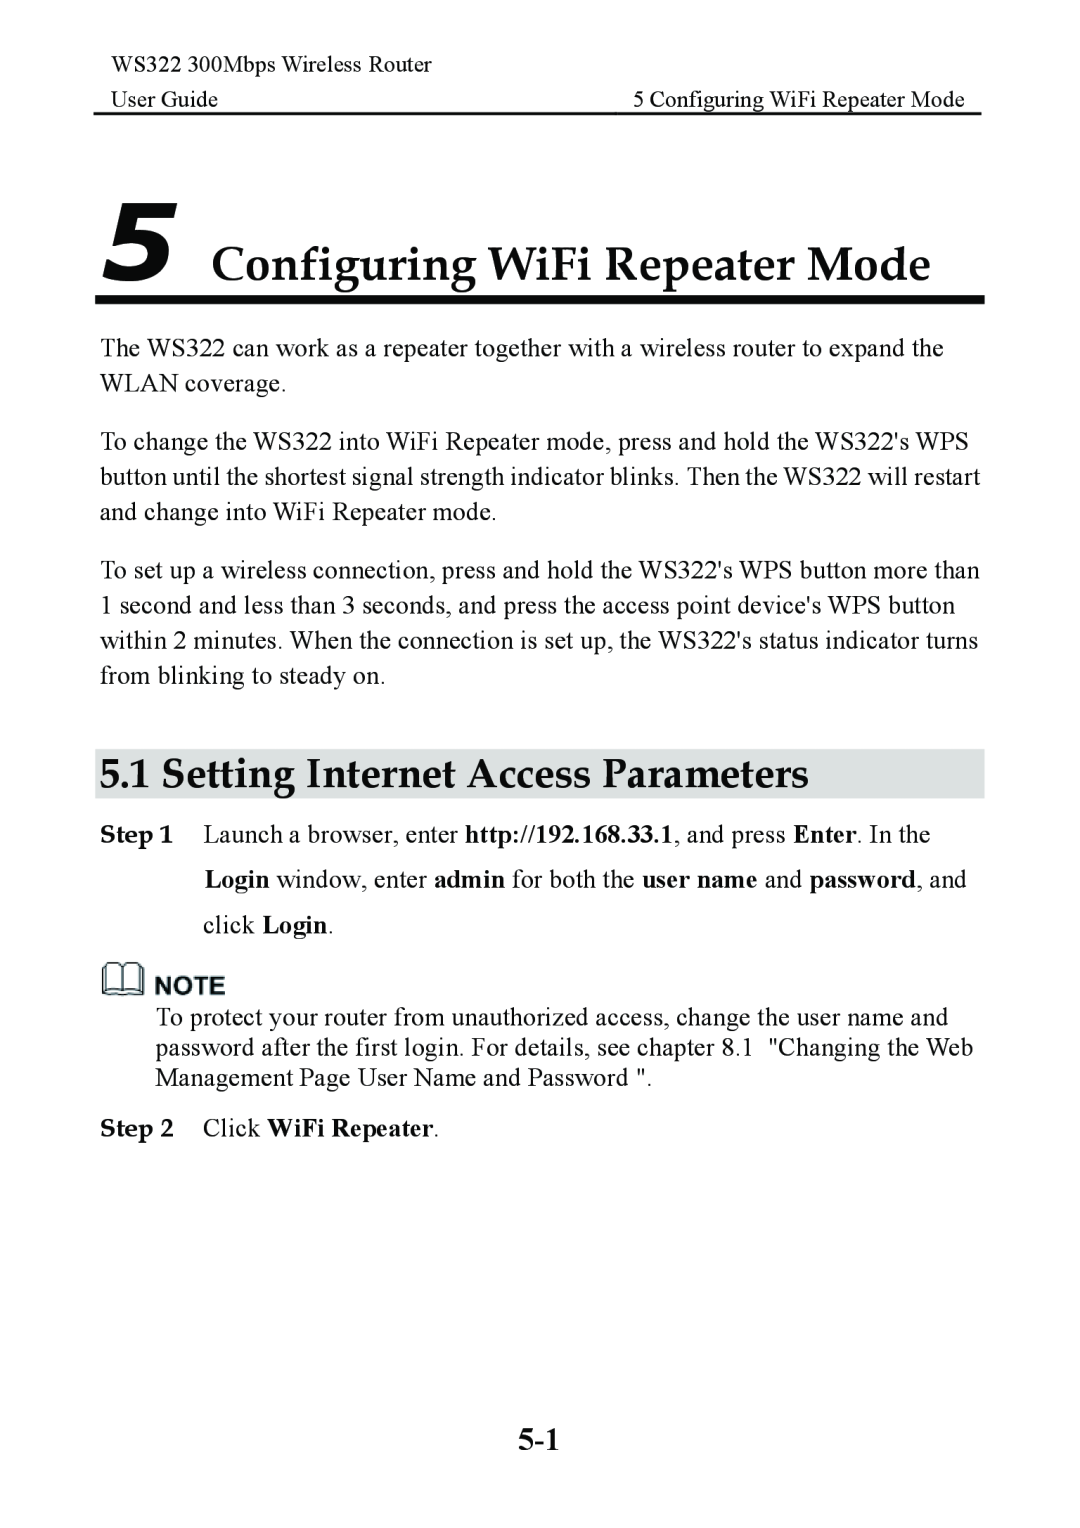 Huawei WS322 manual Configuring WiFi Repeater Mode, Setting Internet Access Parameters, Click WiFi Repeater 